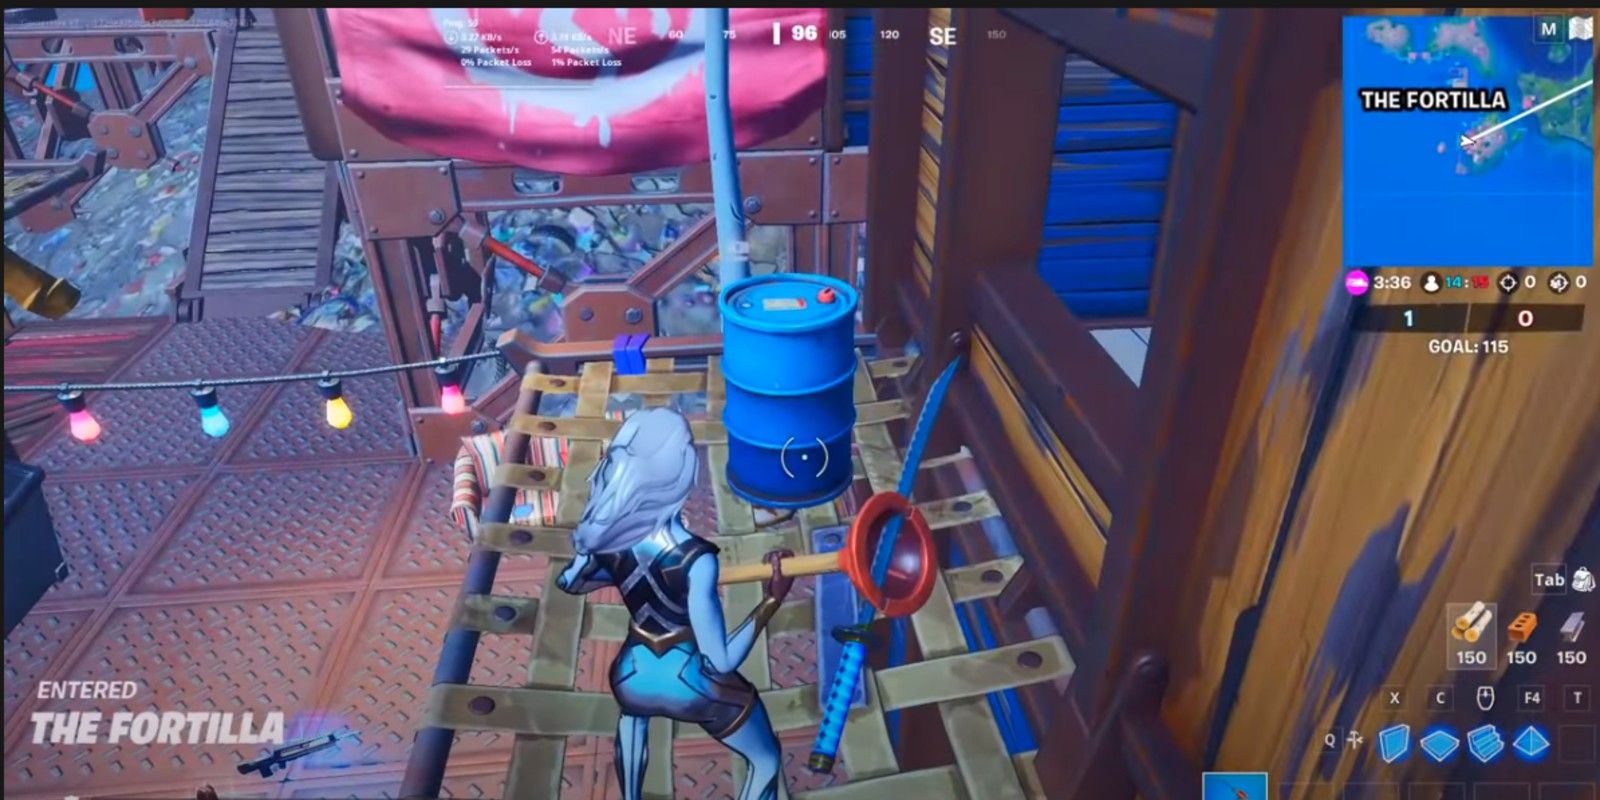 A player dressed as Storm finds a barrel at the Fortilla in Fortnite